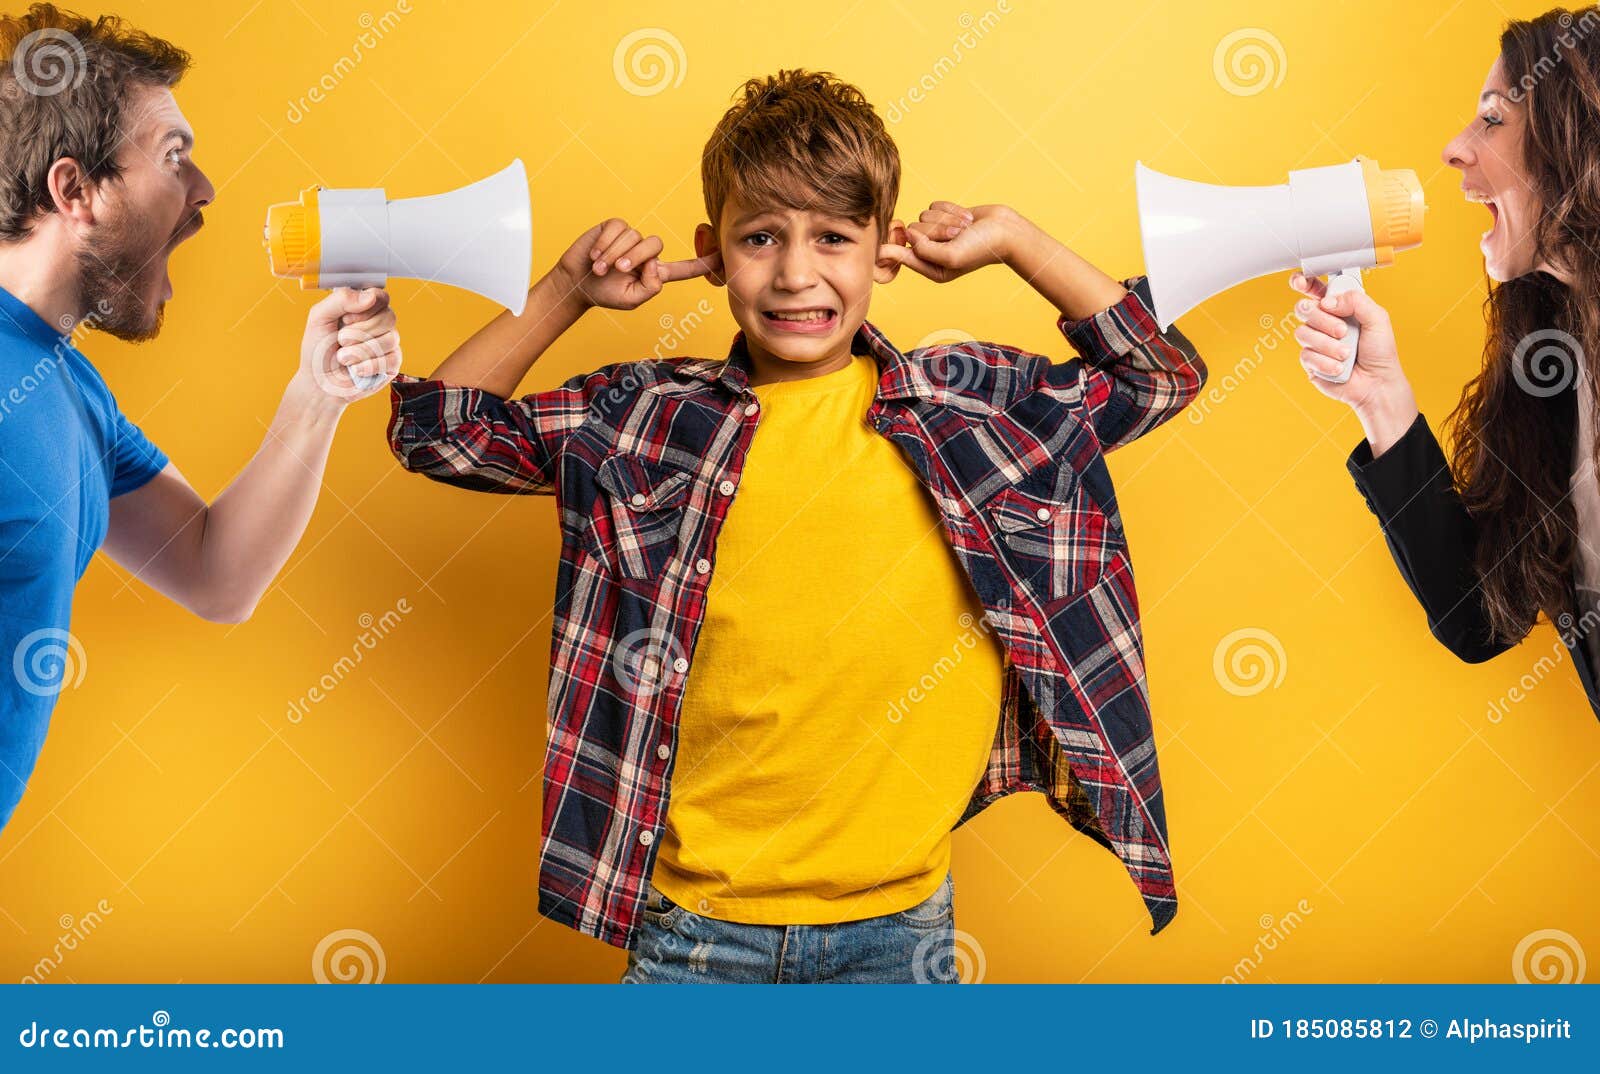 child covers his ears because he does not want to hear the cries and reproaches of his parents. yellow background